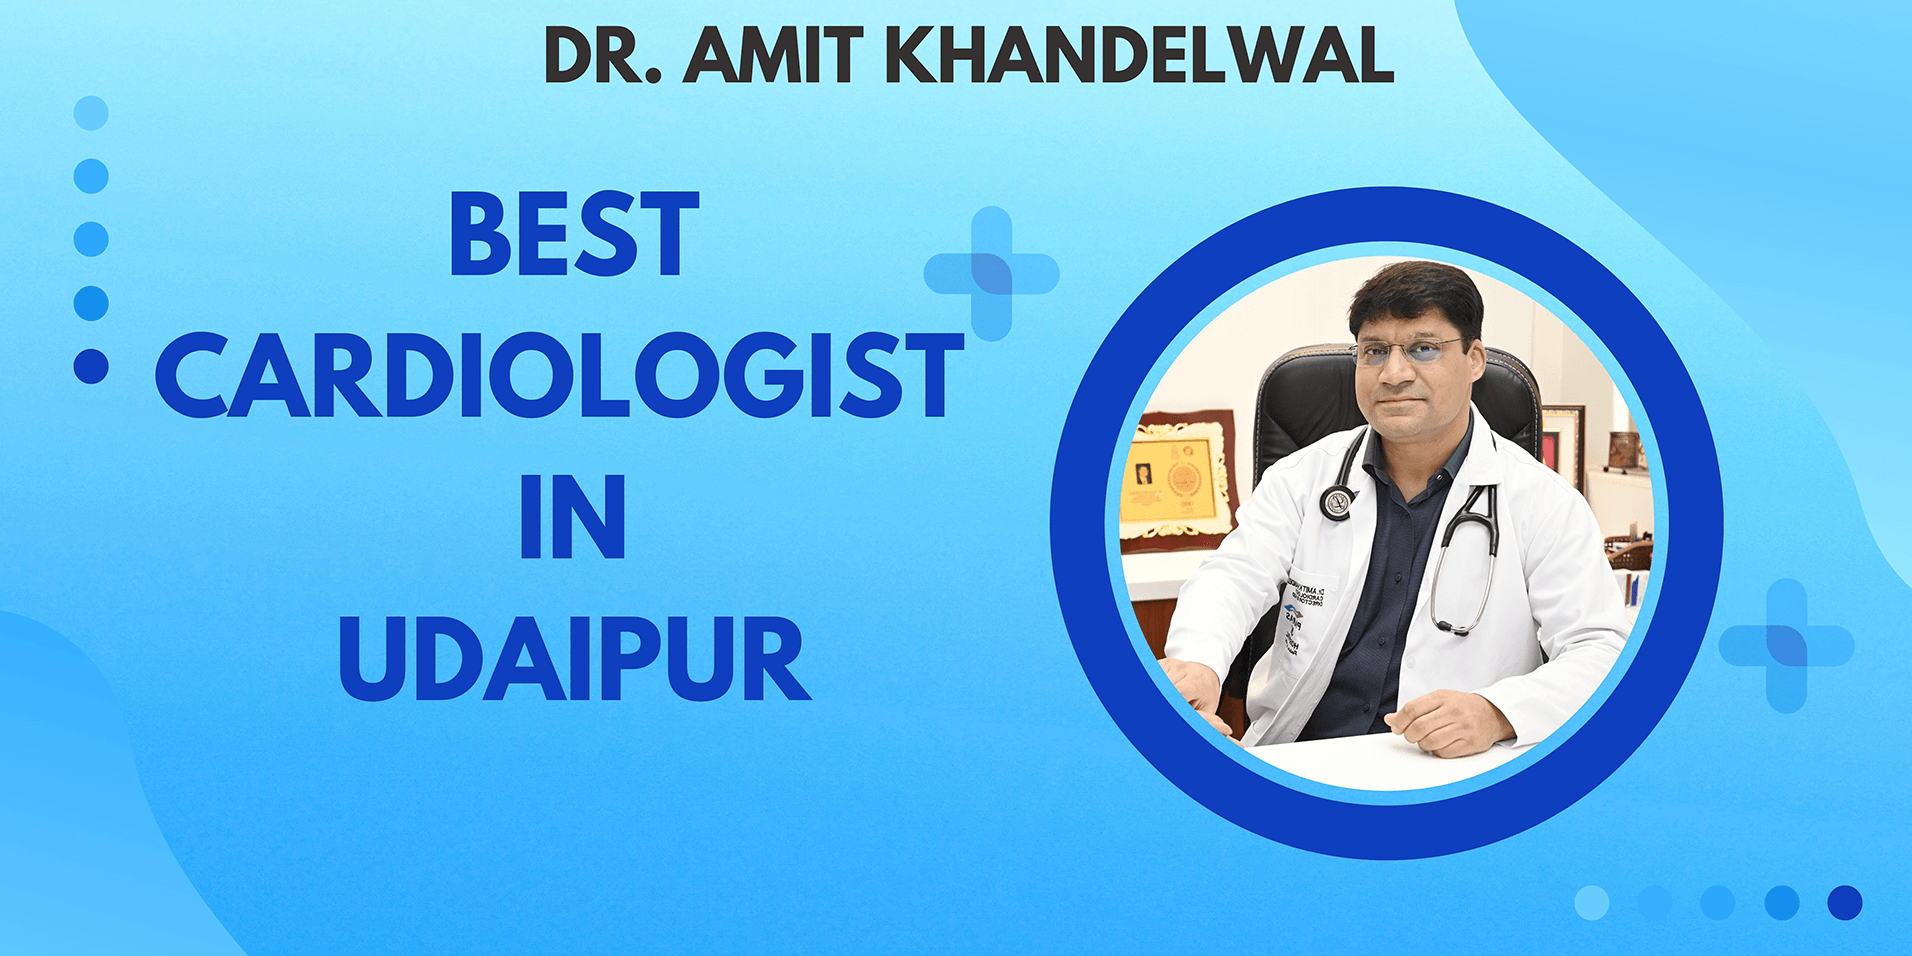 Dr Amit Khandelwal: Best Cardiologist In Udaipur